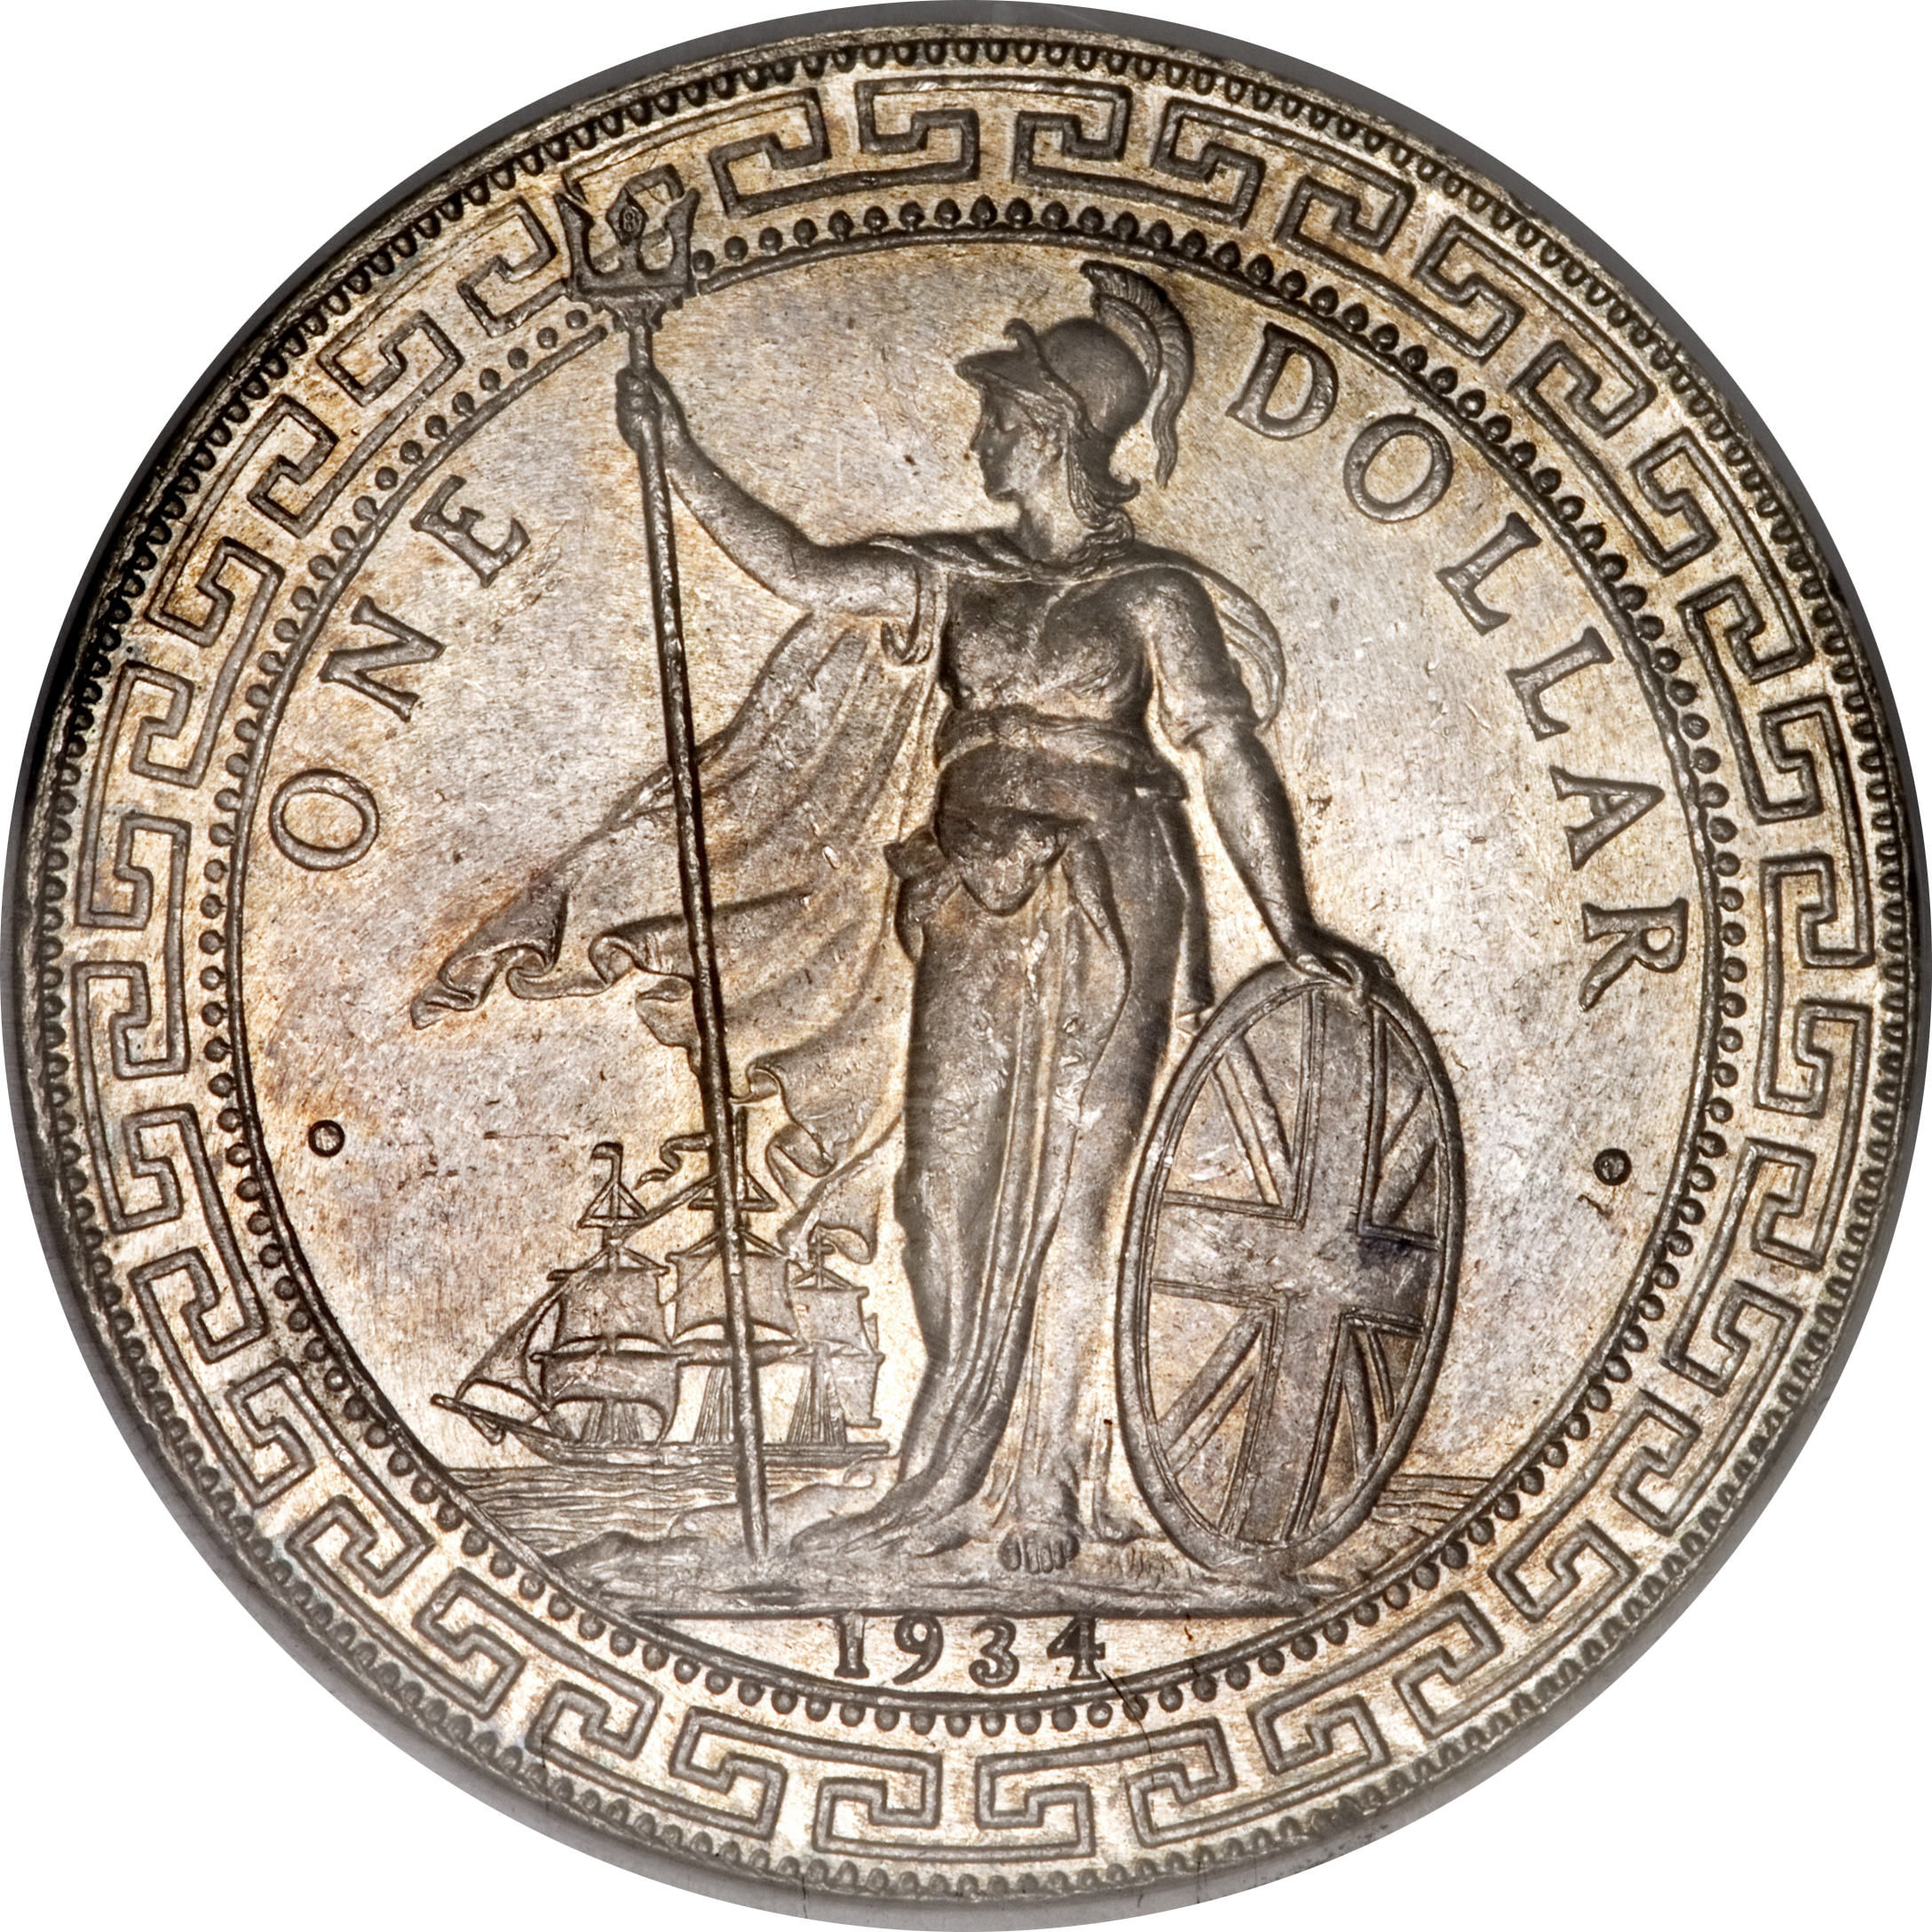 Abolition Of The Slave Trade UK £2 Coin